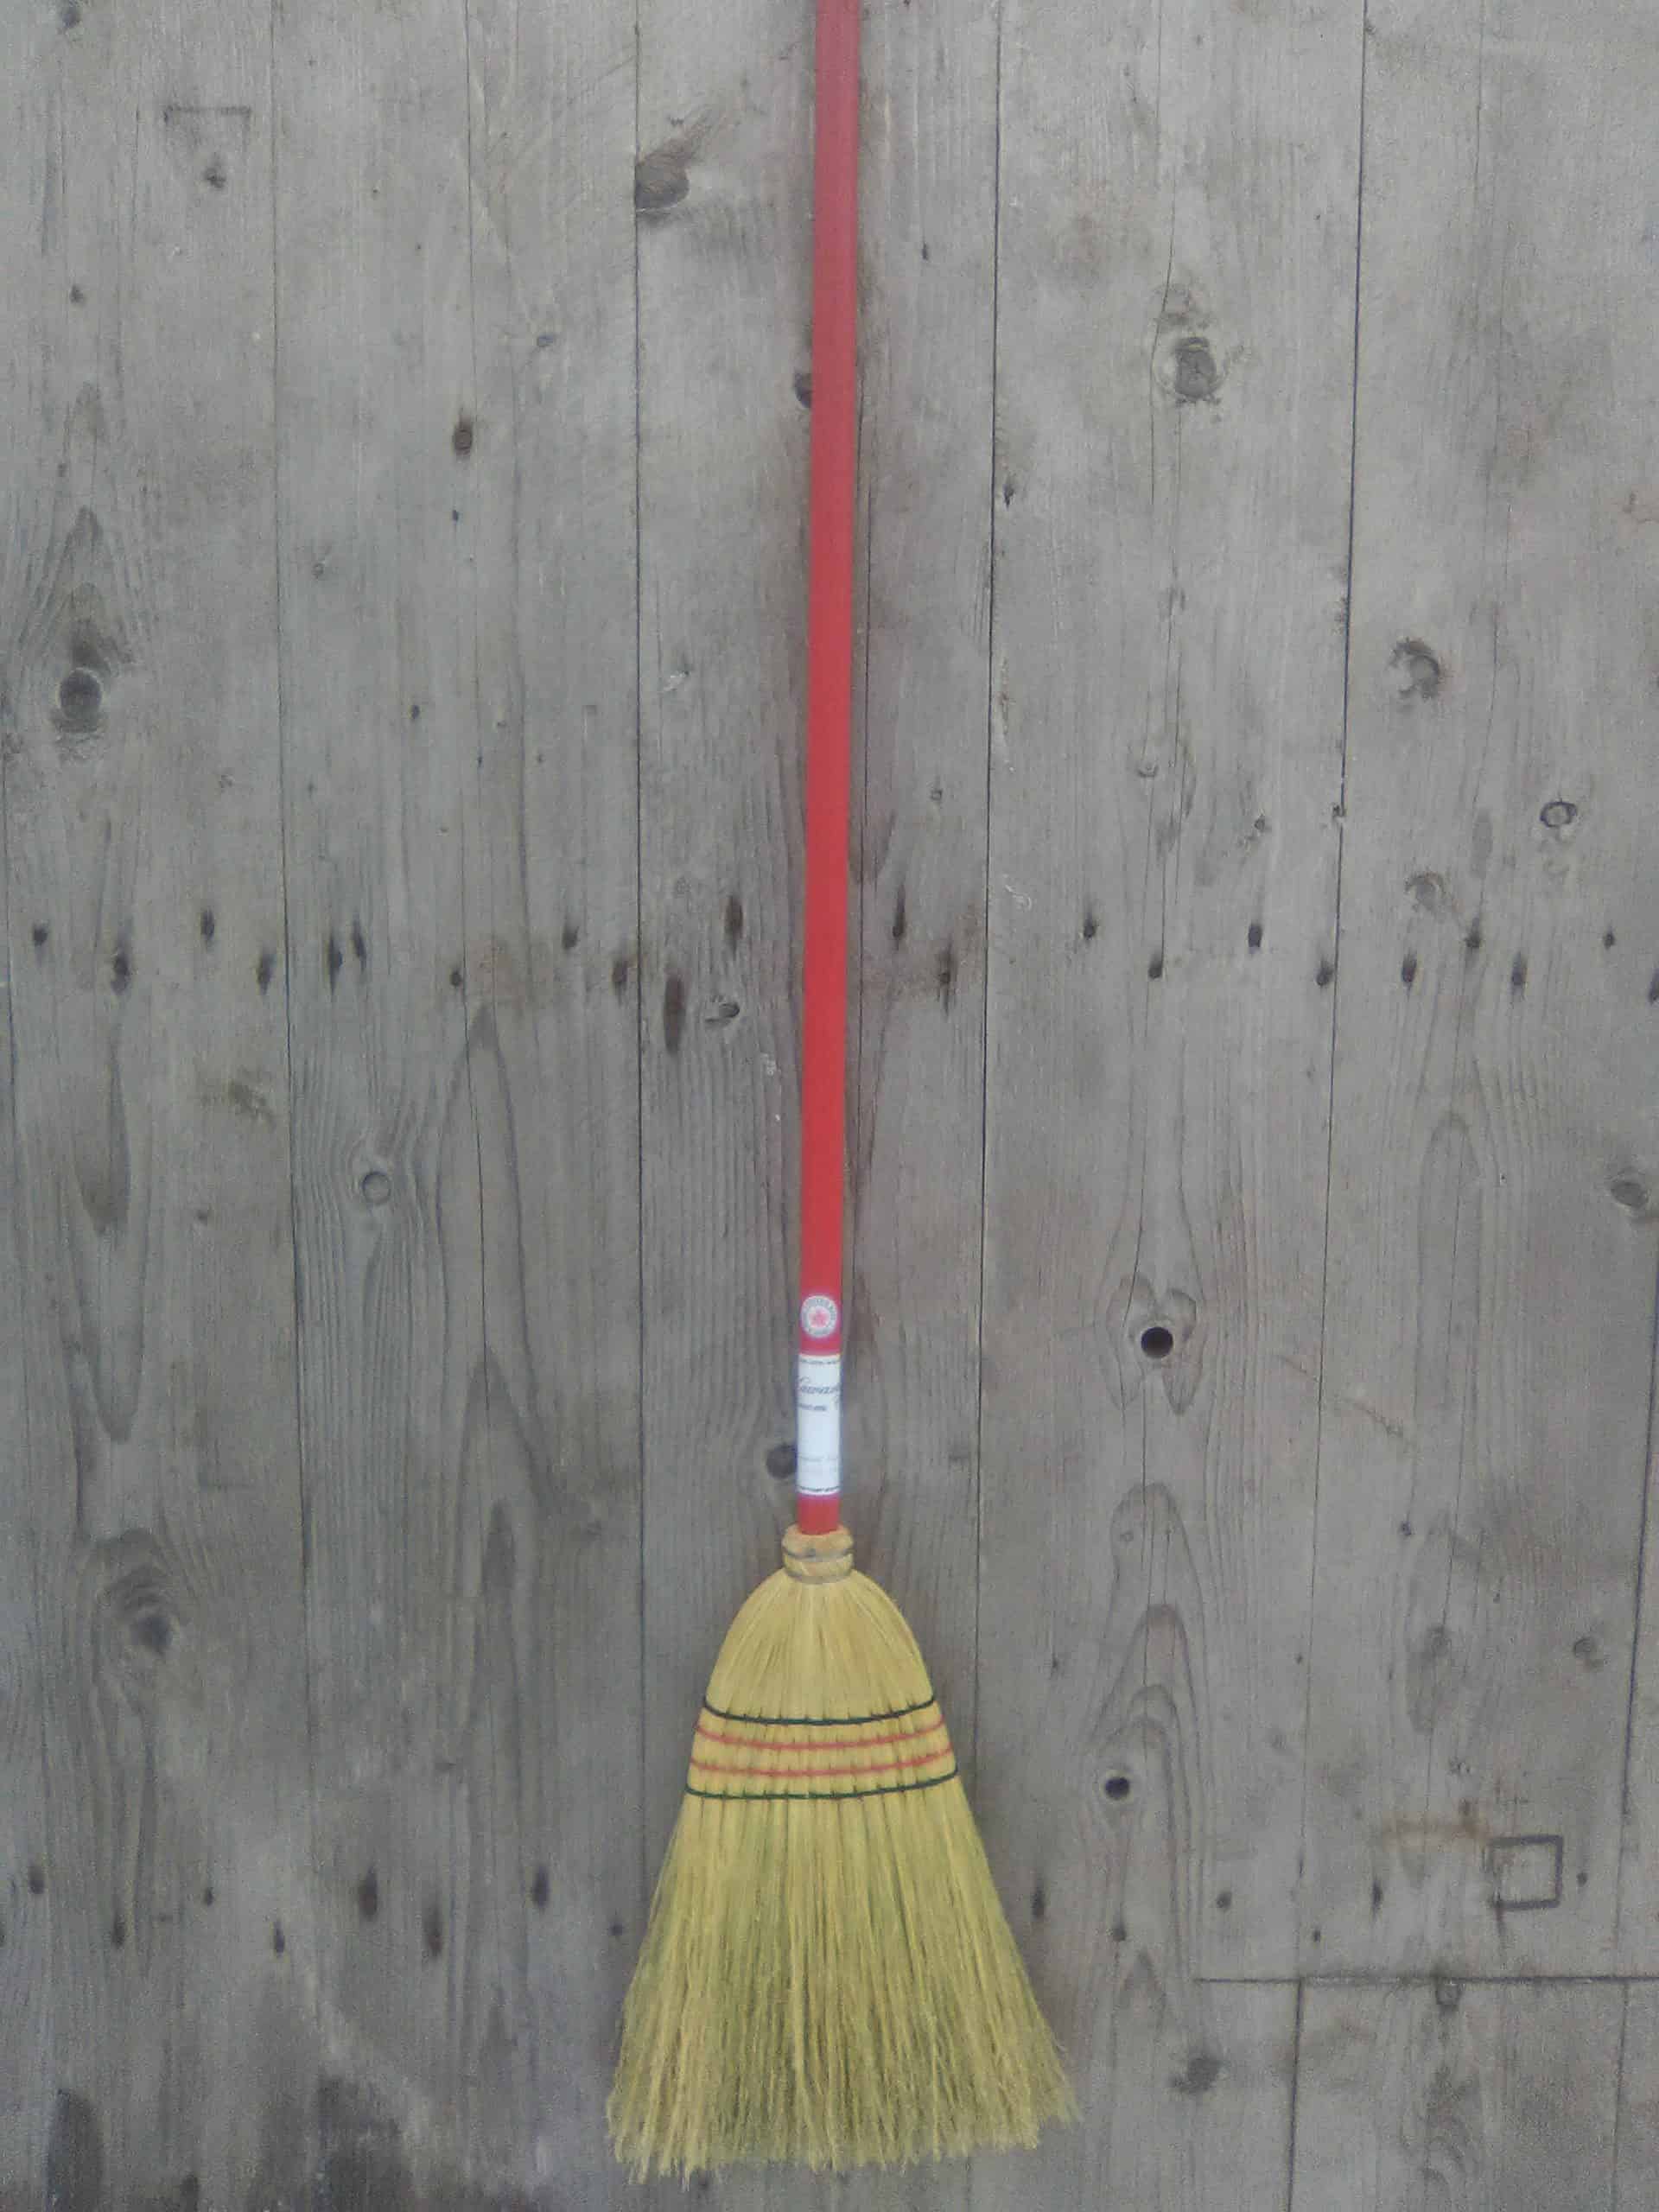 The great canadian kitchen broom - light!